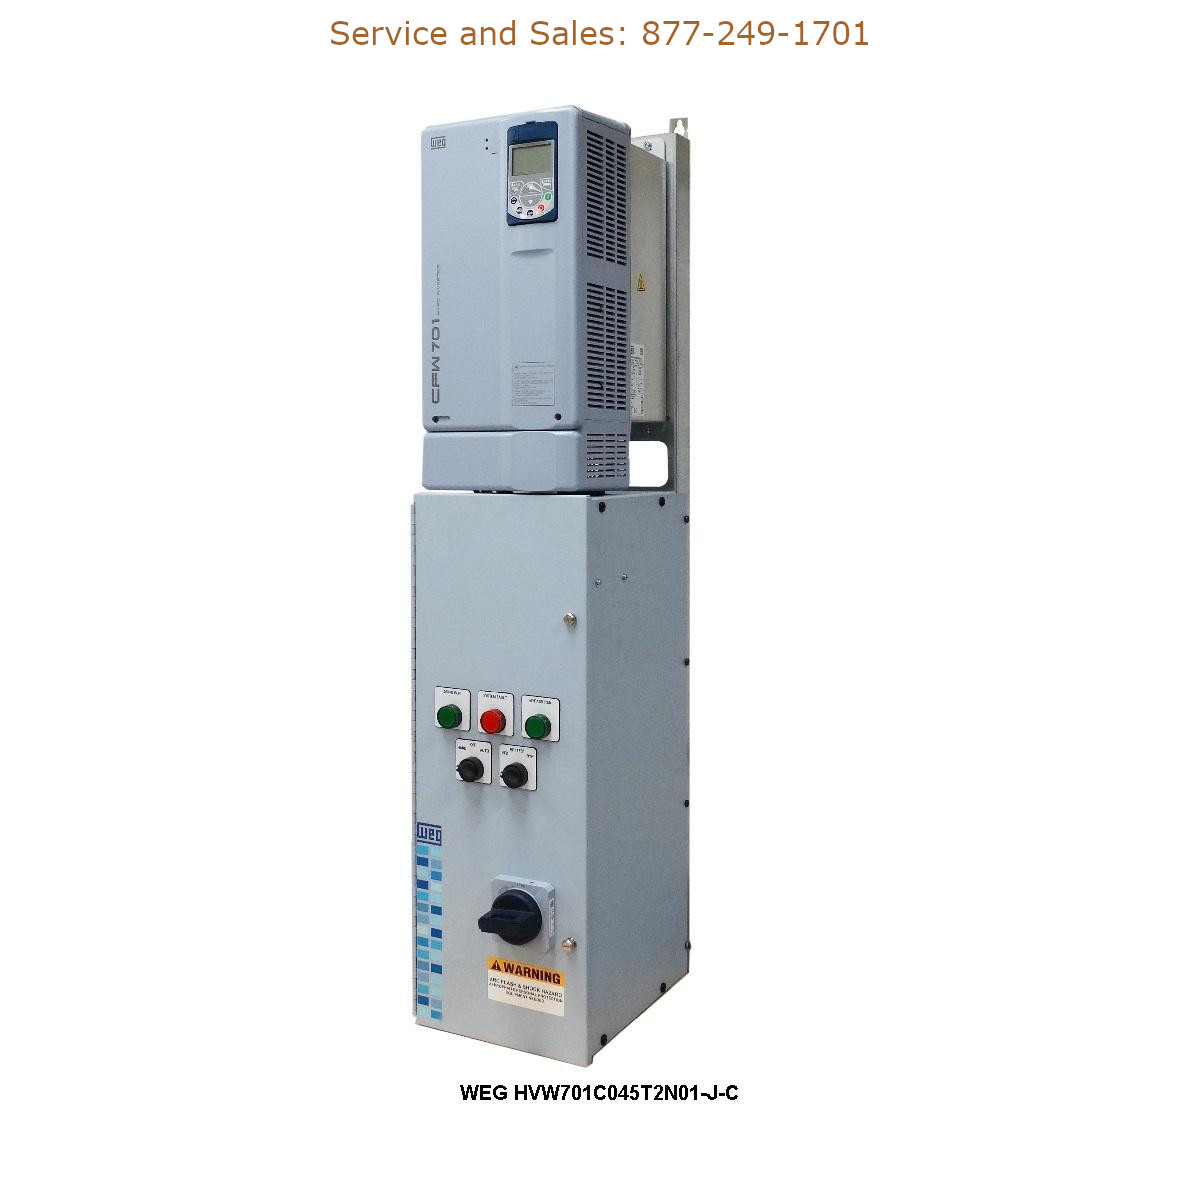 WEG HVW701C045T2N01-J-C WEG Model Number HVW701C045T2N01-J-C WEG Drives, Variable Speed Drives Repair Service, Troubleshooting, Replacement Parts https://gesrepair.com/wp-content/uploads/2022/WEG/WEG_HVW701C045T2N01-J-C_Drives_Variable_Speed_Drives.jpg